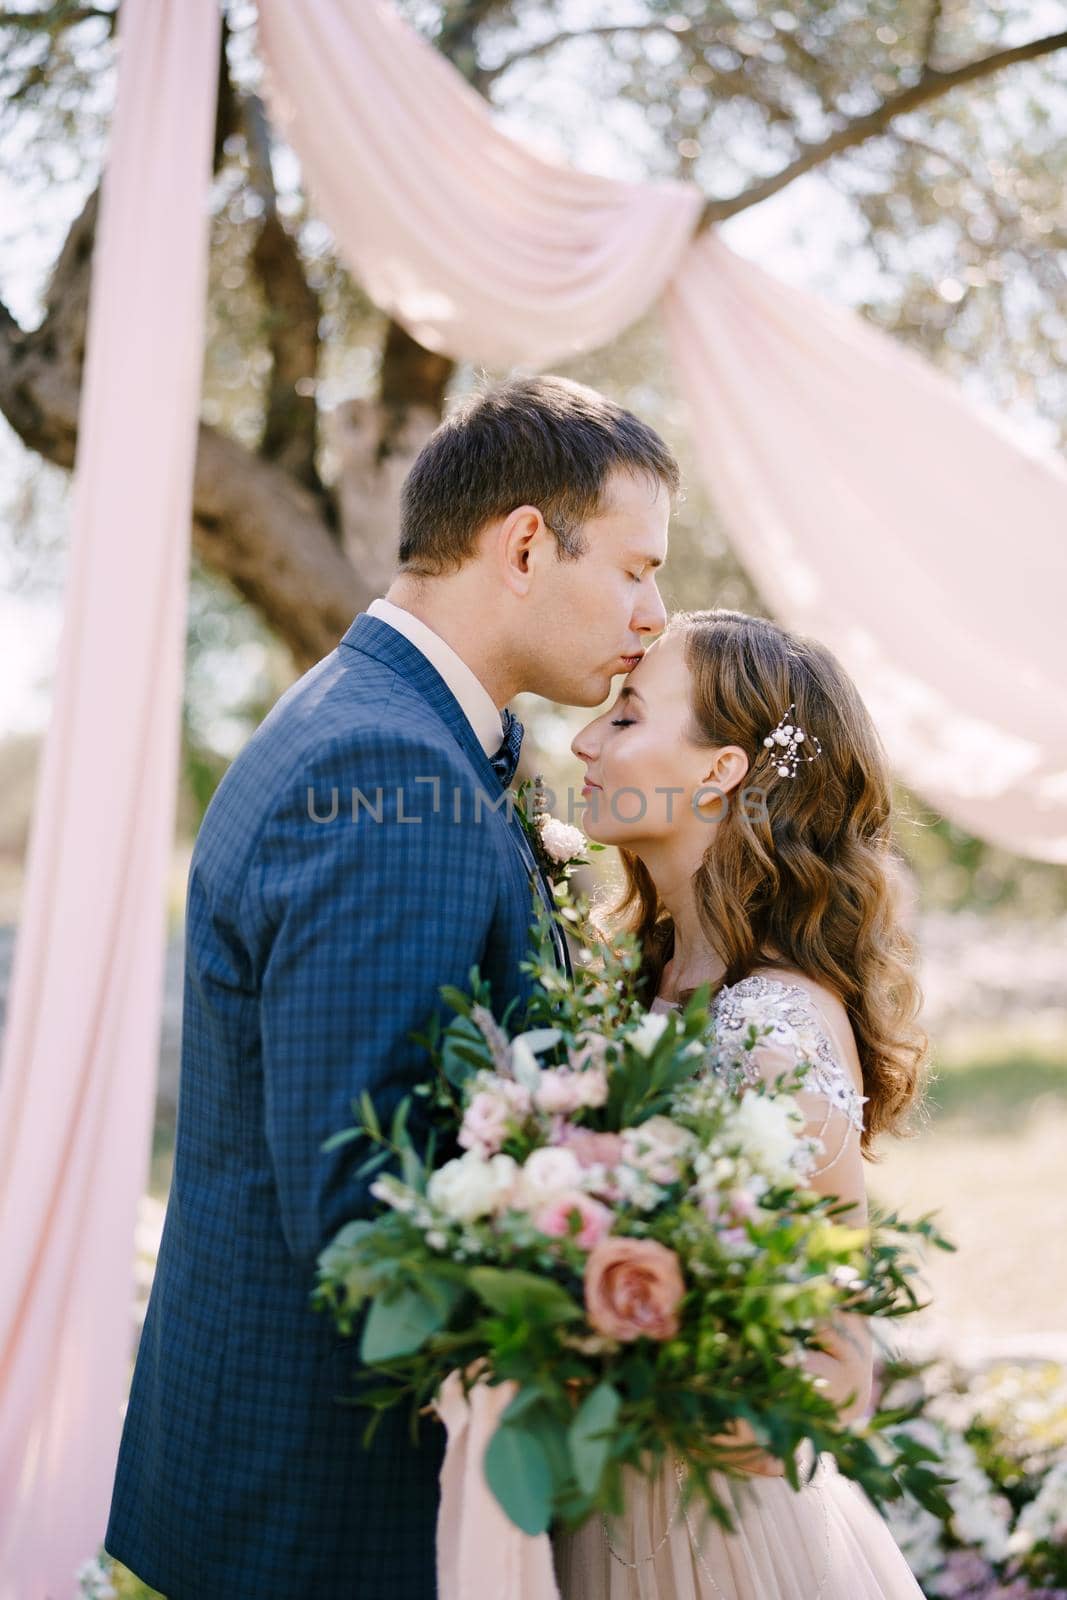 Groom kisses bride on the forehead with a bouquet of flowers under a tree. Portrait by Nadtochiy